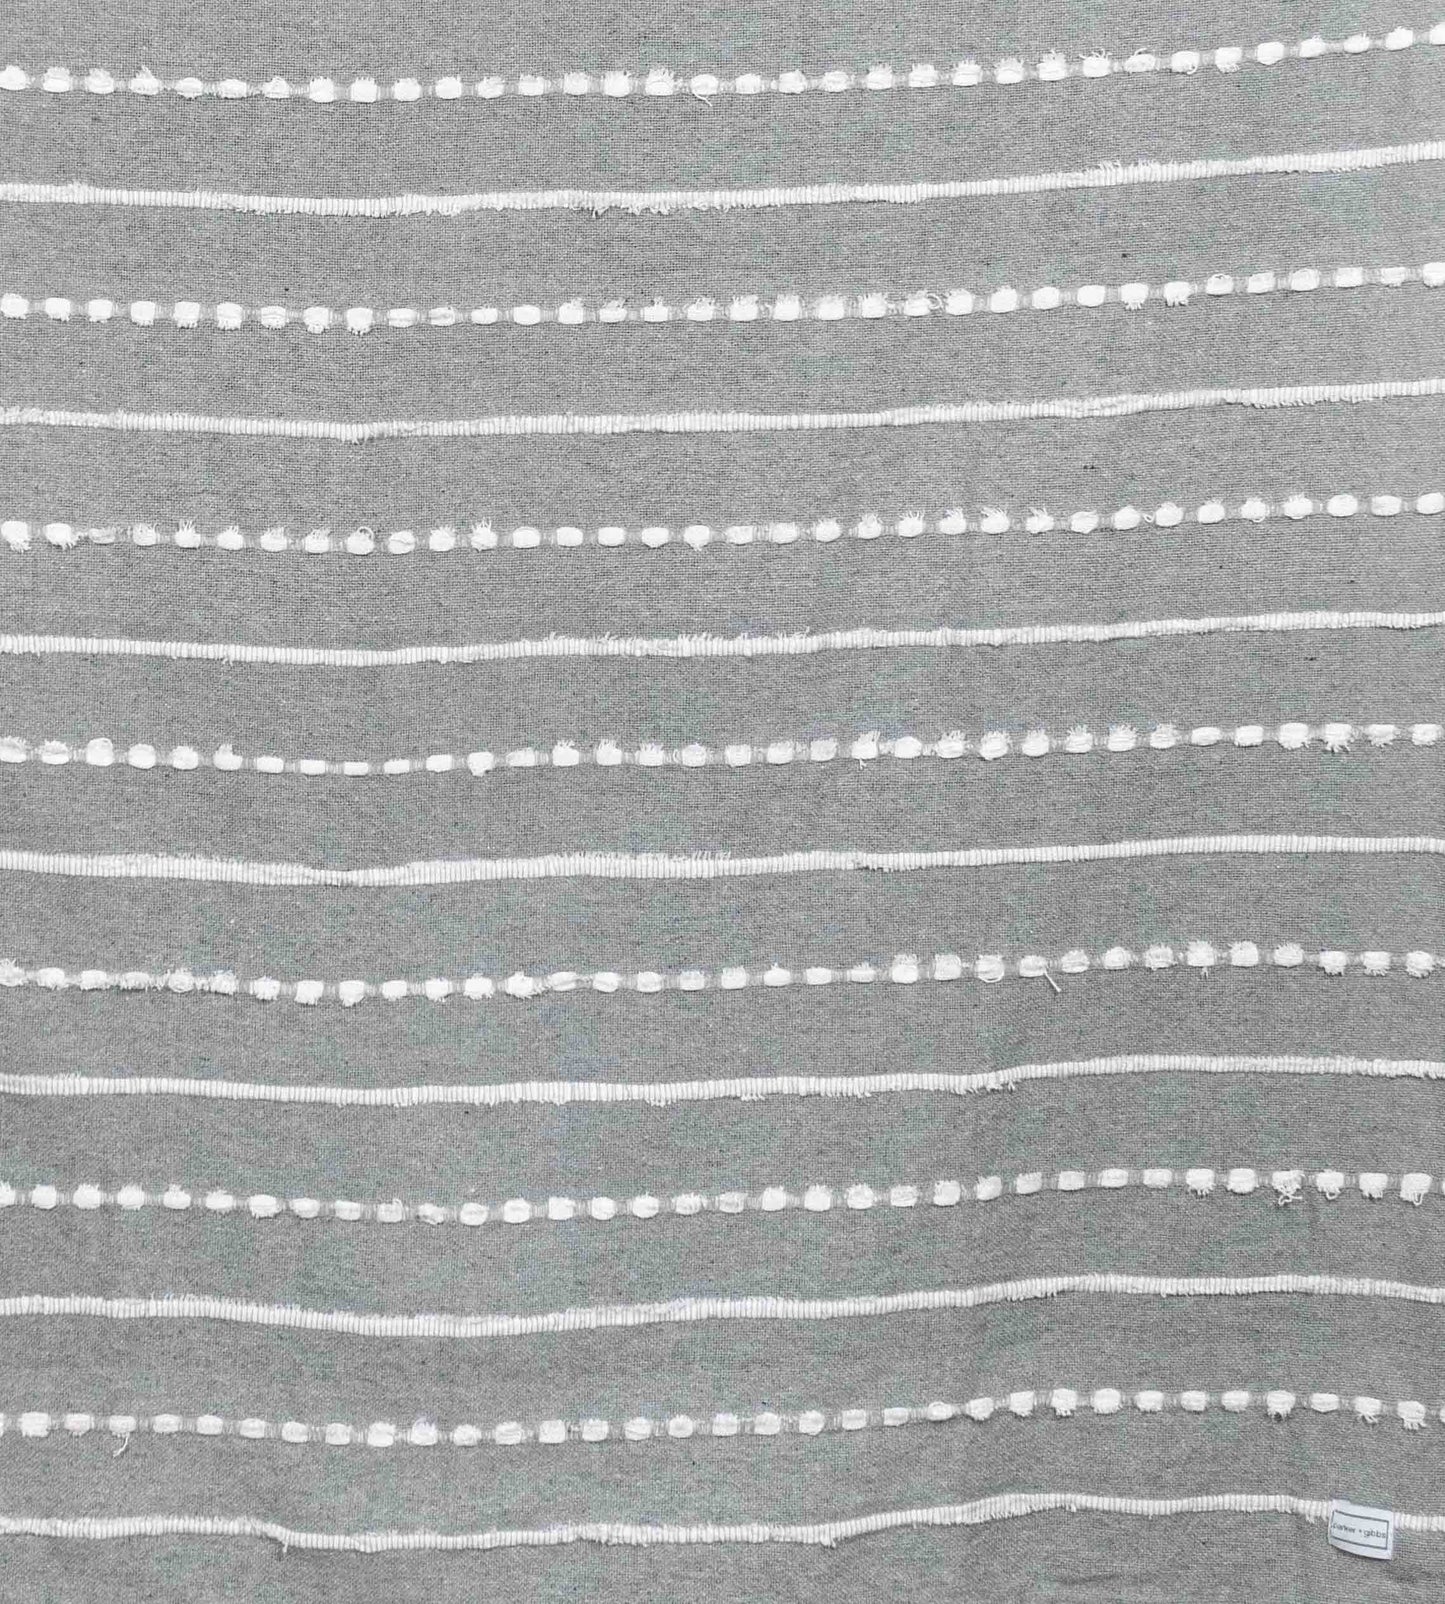 Cotton throw blanket with gray stitching and white tufted stitched stripes